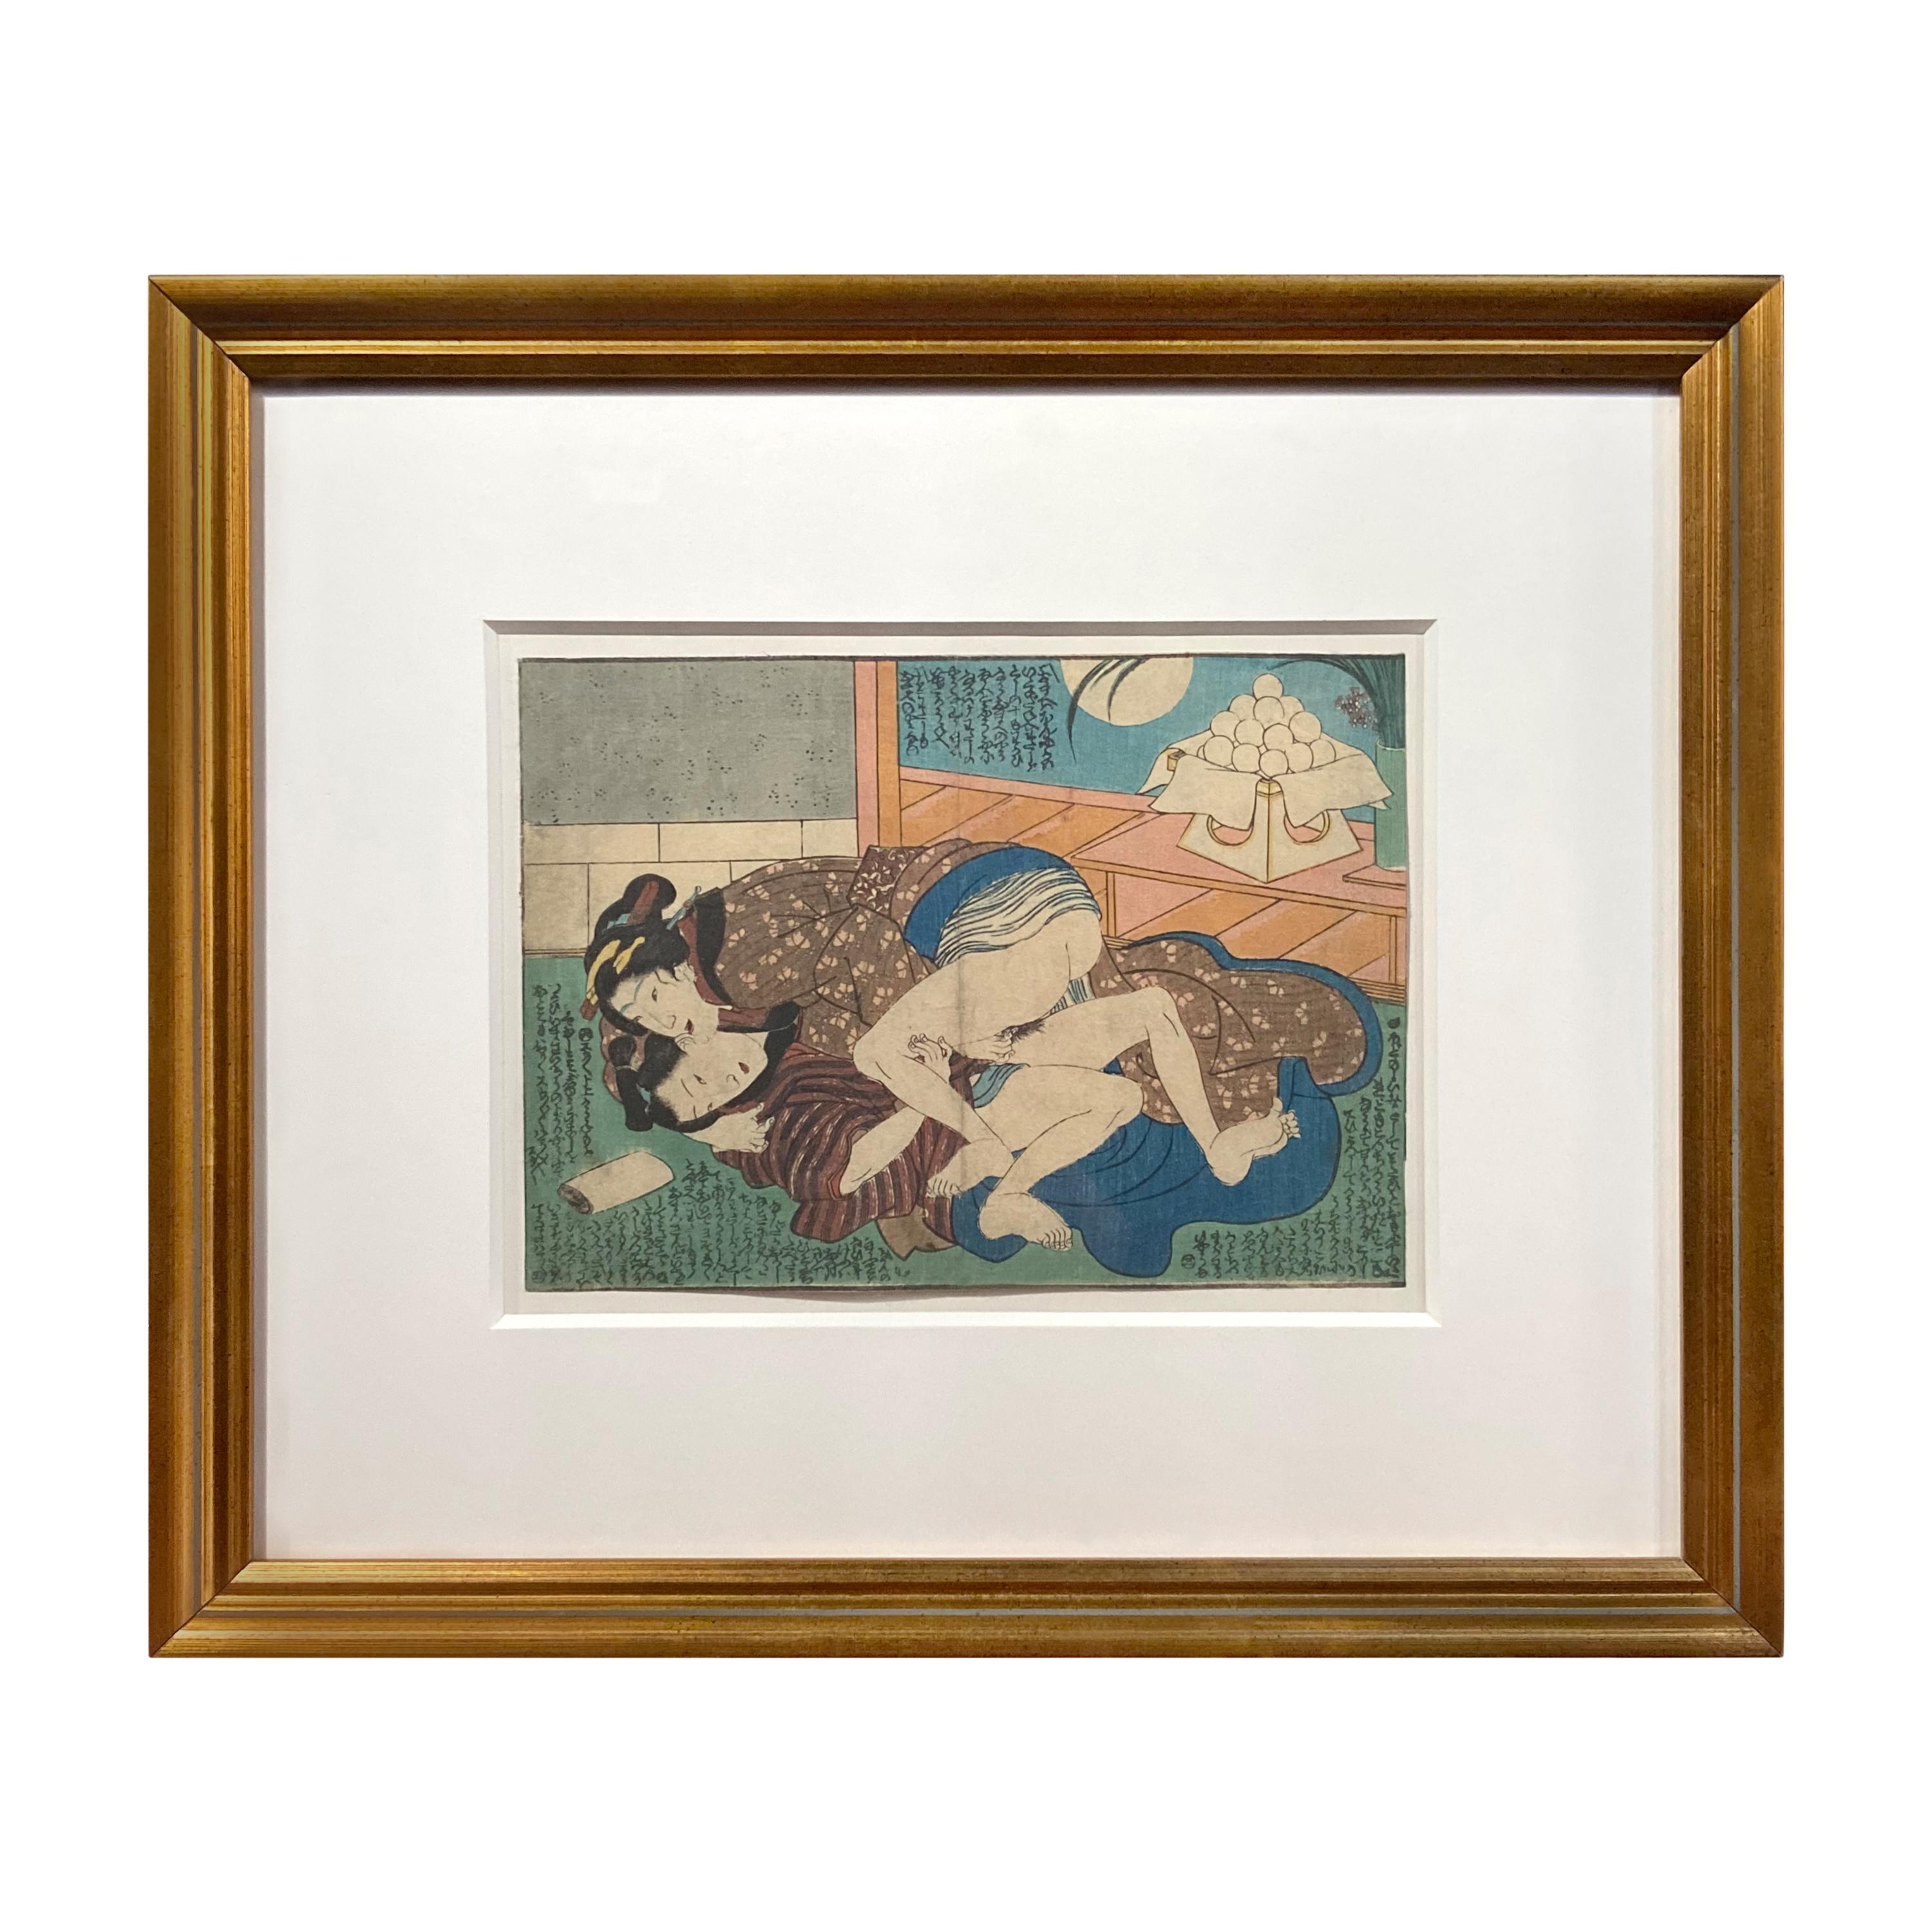 An antique Japanese Shunga woodblock print in gilt frame depicting two women making love. Created in Japan, this woodblock print called a Shunga and depicting two women making love, derives from an erotic artistic tradition featuring graphic images